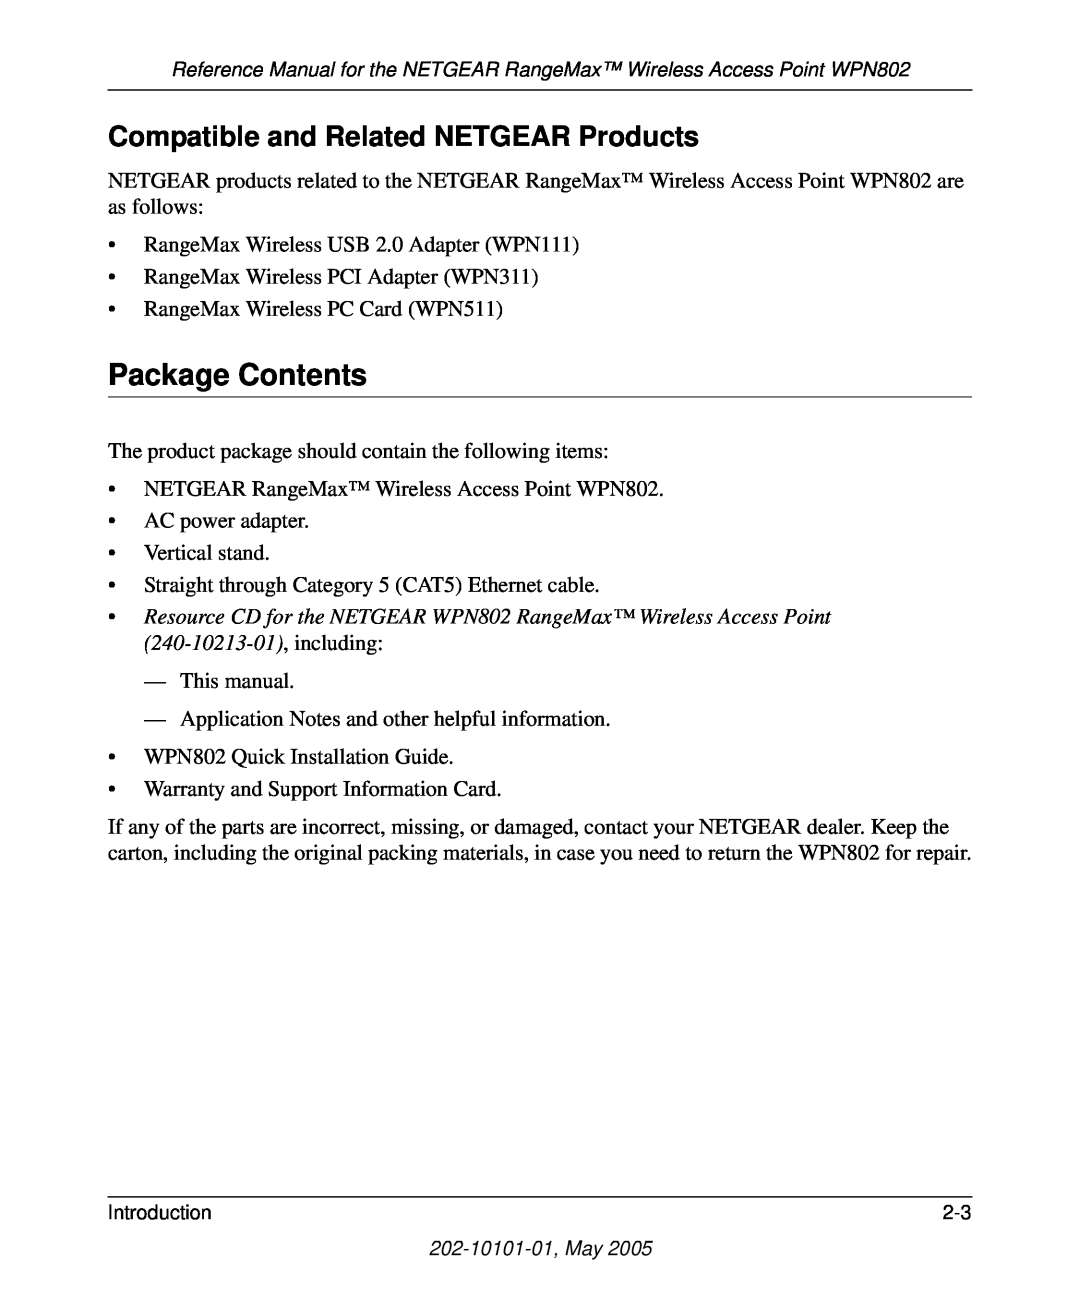 NETGEAR WPN802 manual Package Contents, Compatible and Related NETGEAR Products, 240-10213-01, including 